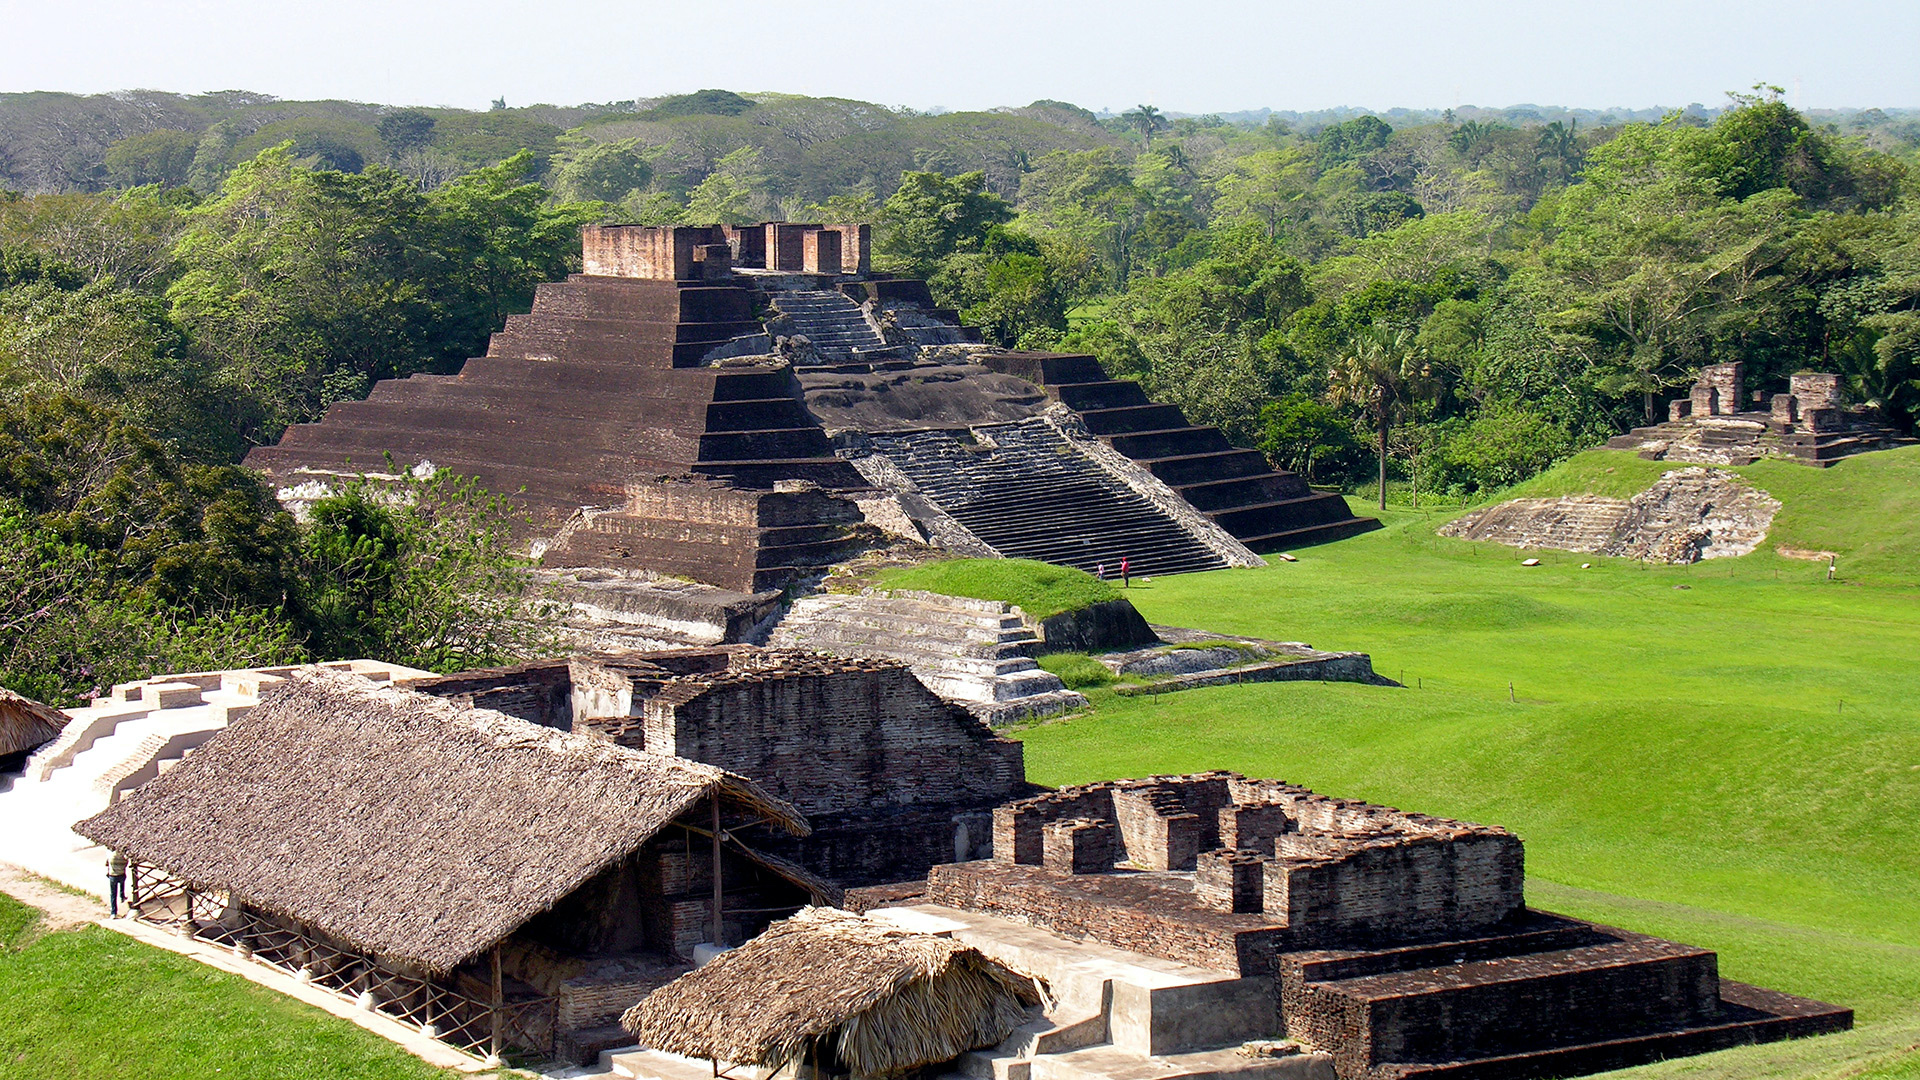 Maya village and temple ruins in Mexico.

